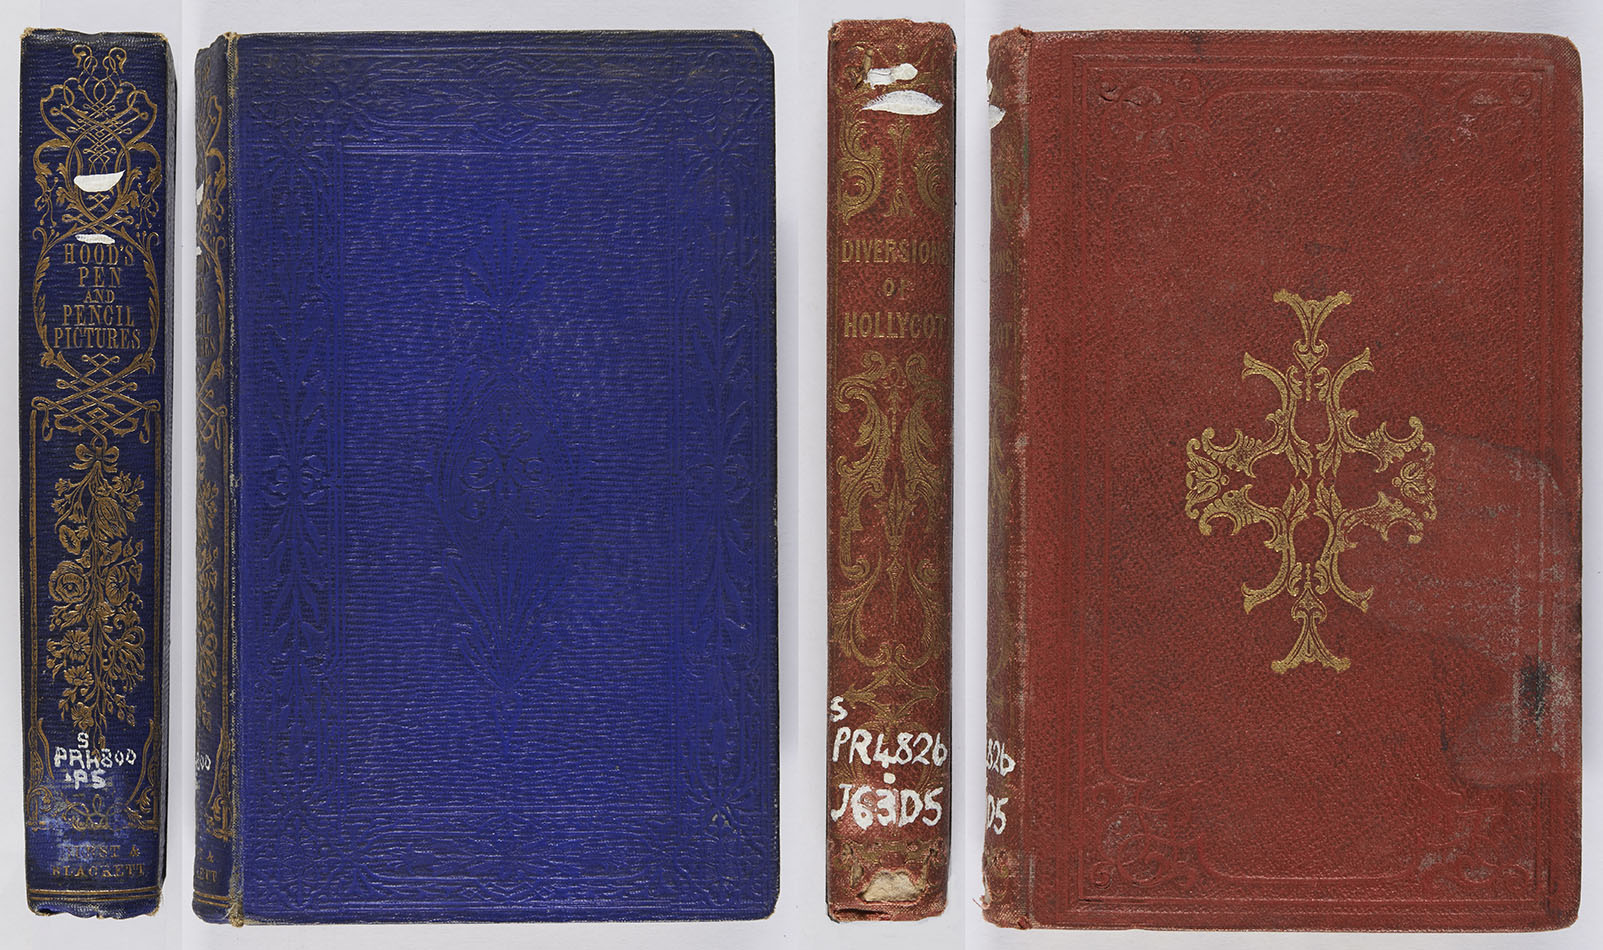 The first binding has a spine entirely blocked in gold, whilst the covers are blue ribbed morocco grain blocked in blind; the second gilt spine picks up the gilt central motif from the front cover. Thomas Hood, Pen and pencil pictures (London: Hurst & Blackett, 1857; bound by Leighton, Son & Hodge), s PR4800.P5 ; C. I. Johnstone, Diversion of Hollycot, or the mother’s art of thinking (Edinburgh: Oliver & Boyd, 1845), s PR4826.J63D5. 